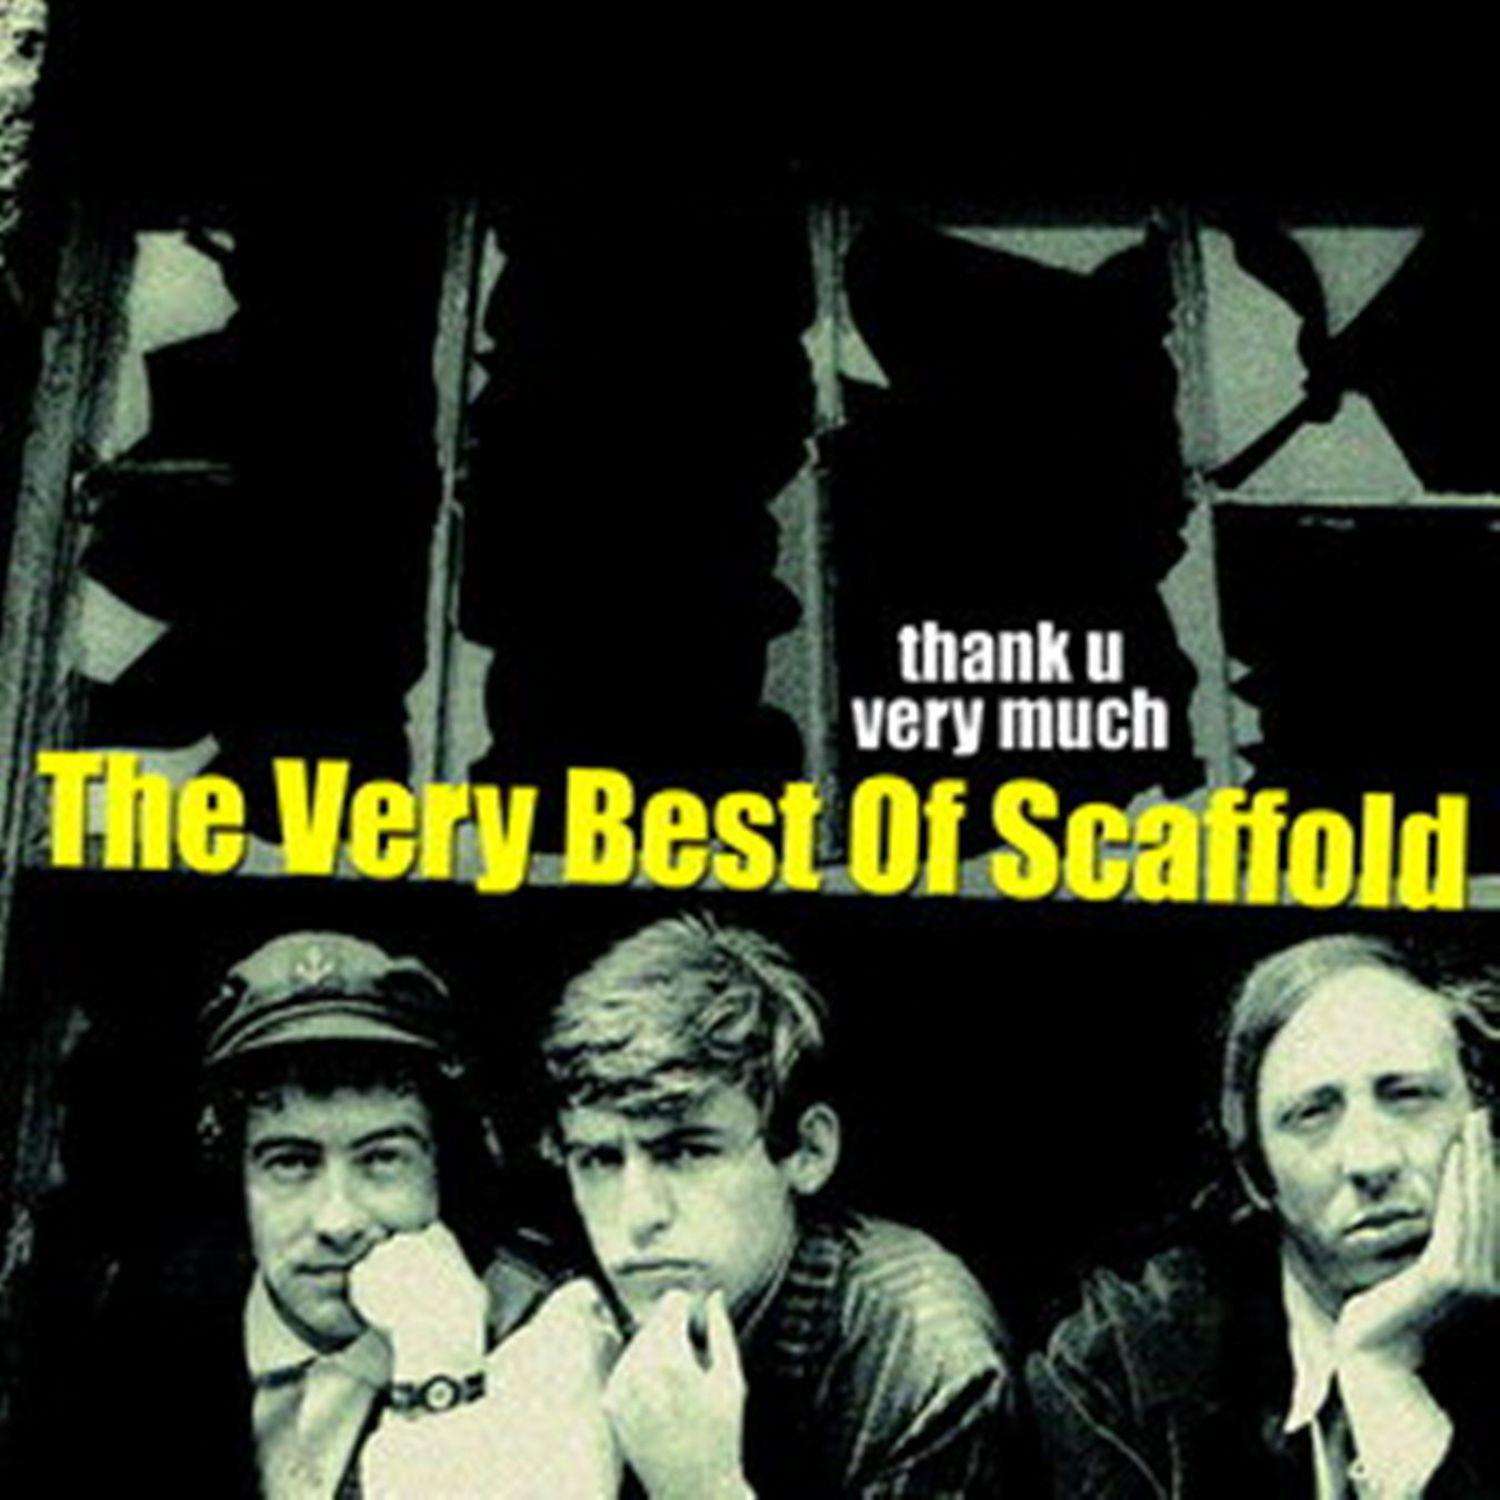 The Scaffold - Carry on Krow